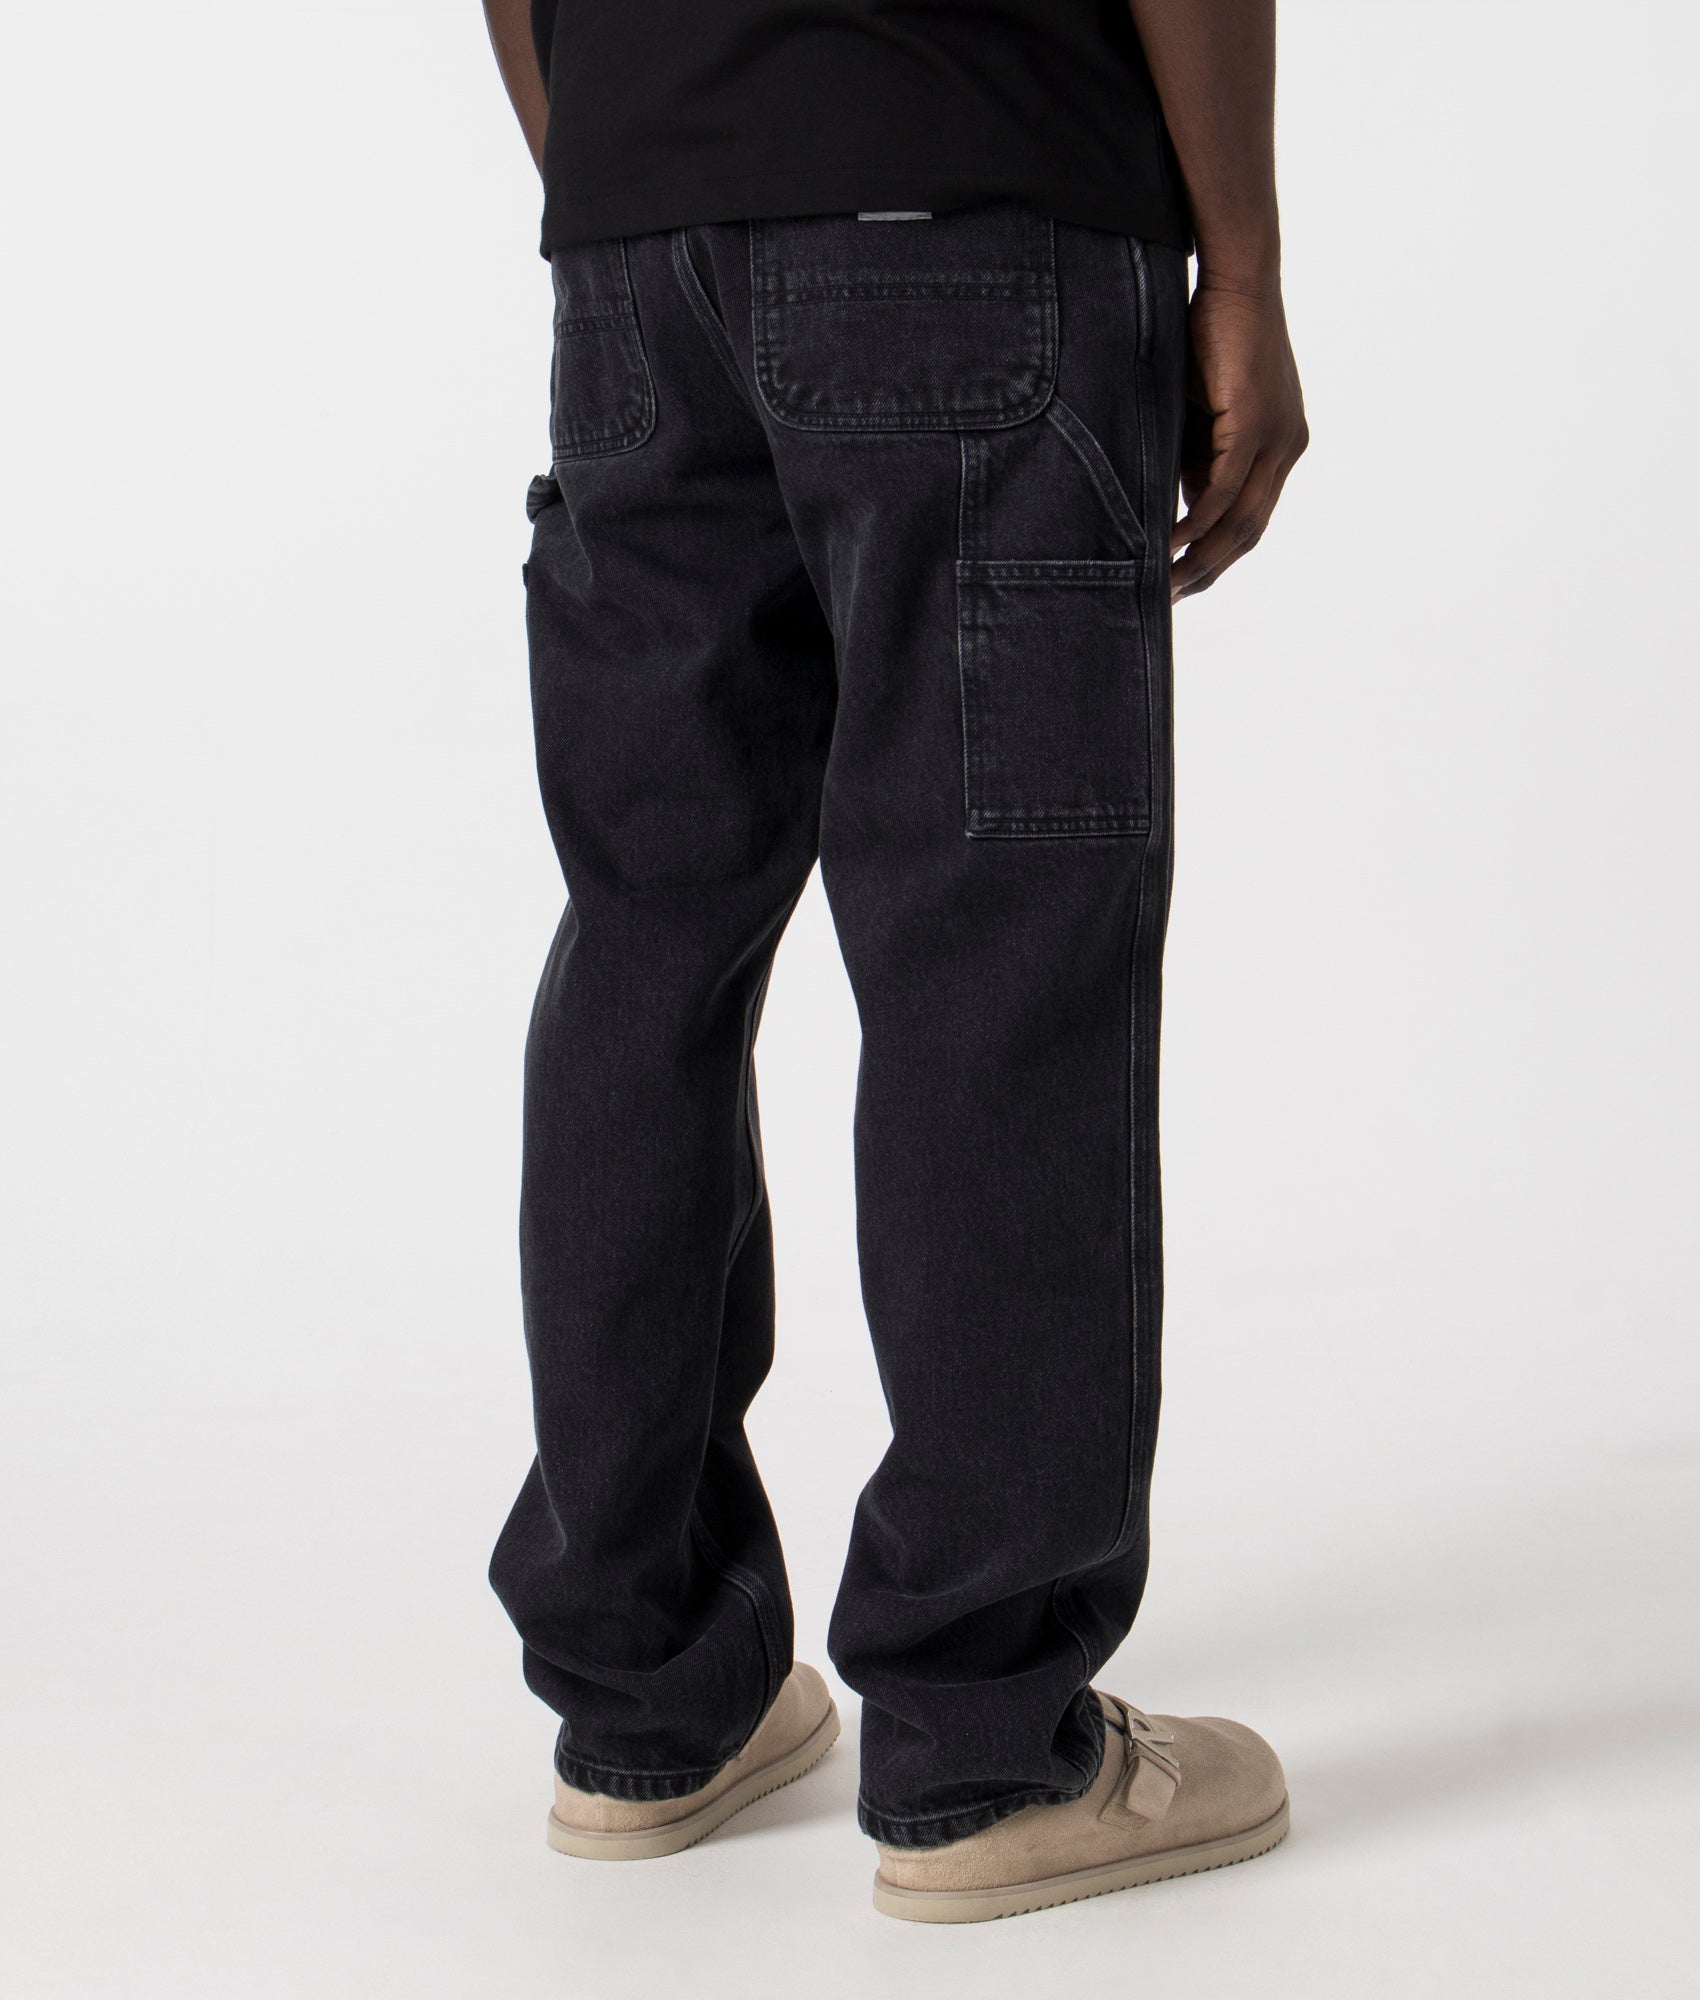 Carhartt WIP Mens Relaxed Fit Single Knee Pants - Colour: 8906 Black Stonewashed - Size: 28R